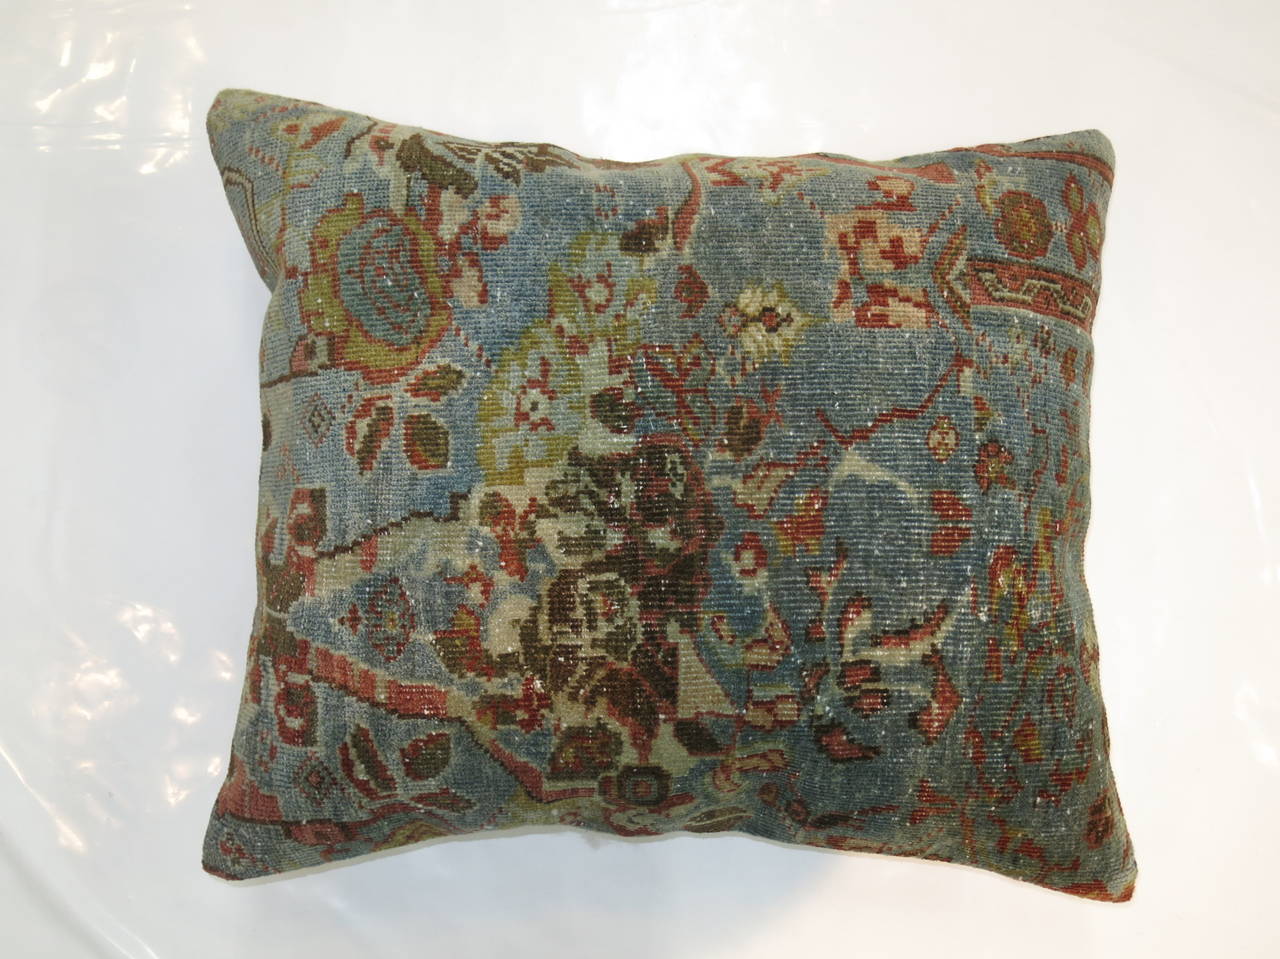 Large pillow from an antique Persian Sultanabad rug in light blue and brown measuring 23'' x 25''. Backed in blue satin.